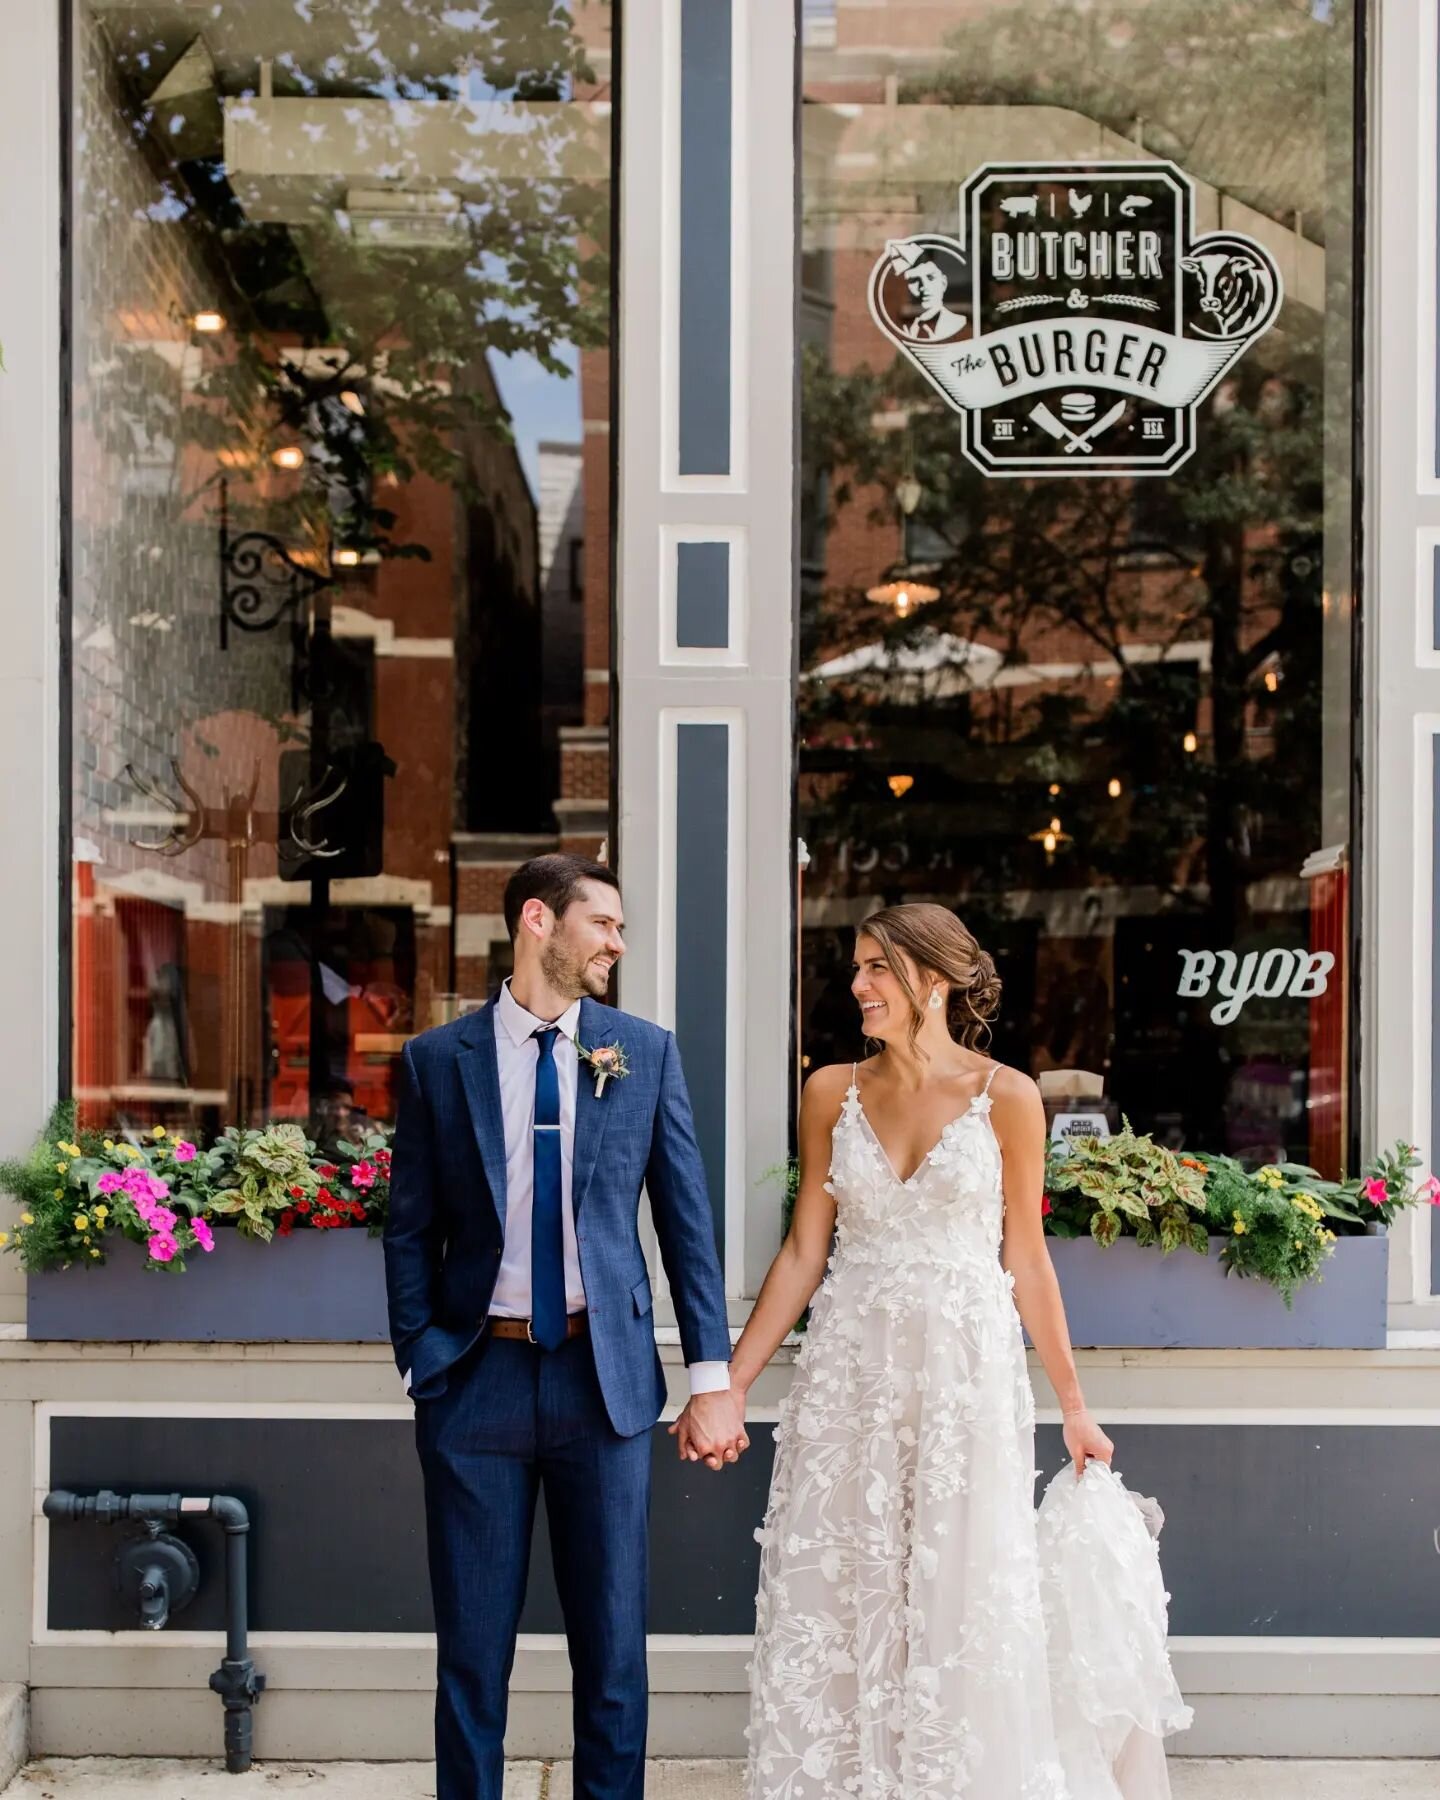 During our photo time, we stopped at Jane and Ryan's first date spot @butcherandtheburger. It was so cool to come full circle with them as they stood there as a bride and groom. 🍔